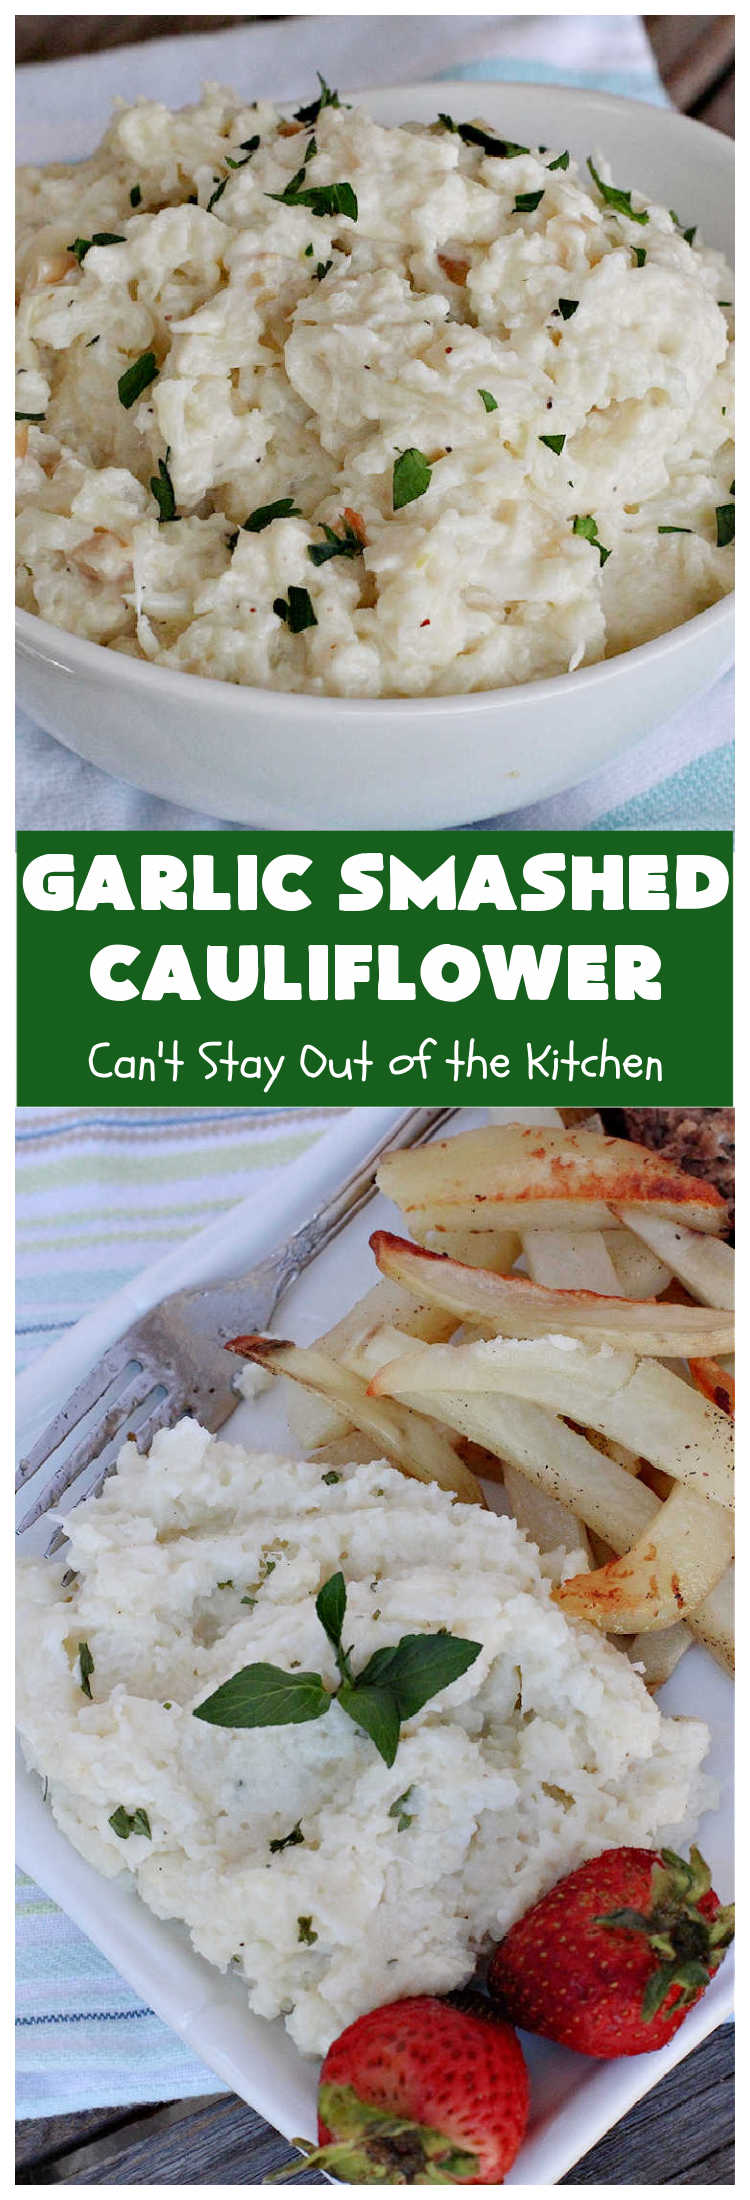 Garlic Smashed Cauliflower | Can't Stay Out of the Kitchen | try this #keto version of #cauliflower that tastes almost like eating #GarlicMashedPotatoes but uses cauliflower instead. Perfect dish for company or #holiday dinners. #GlutenFree #HolidaySideDish #GarlicSmashedCauliflower